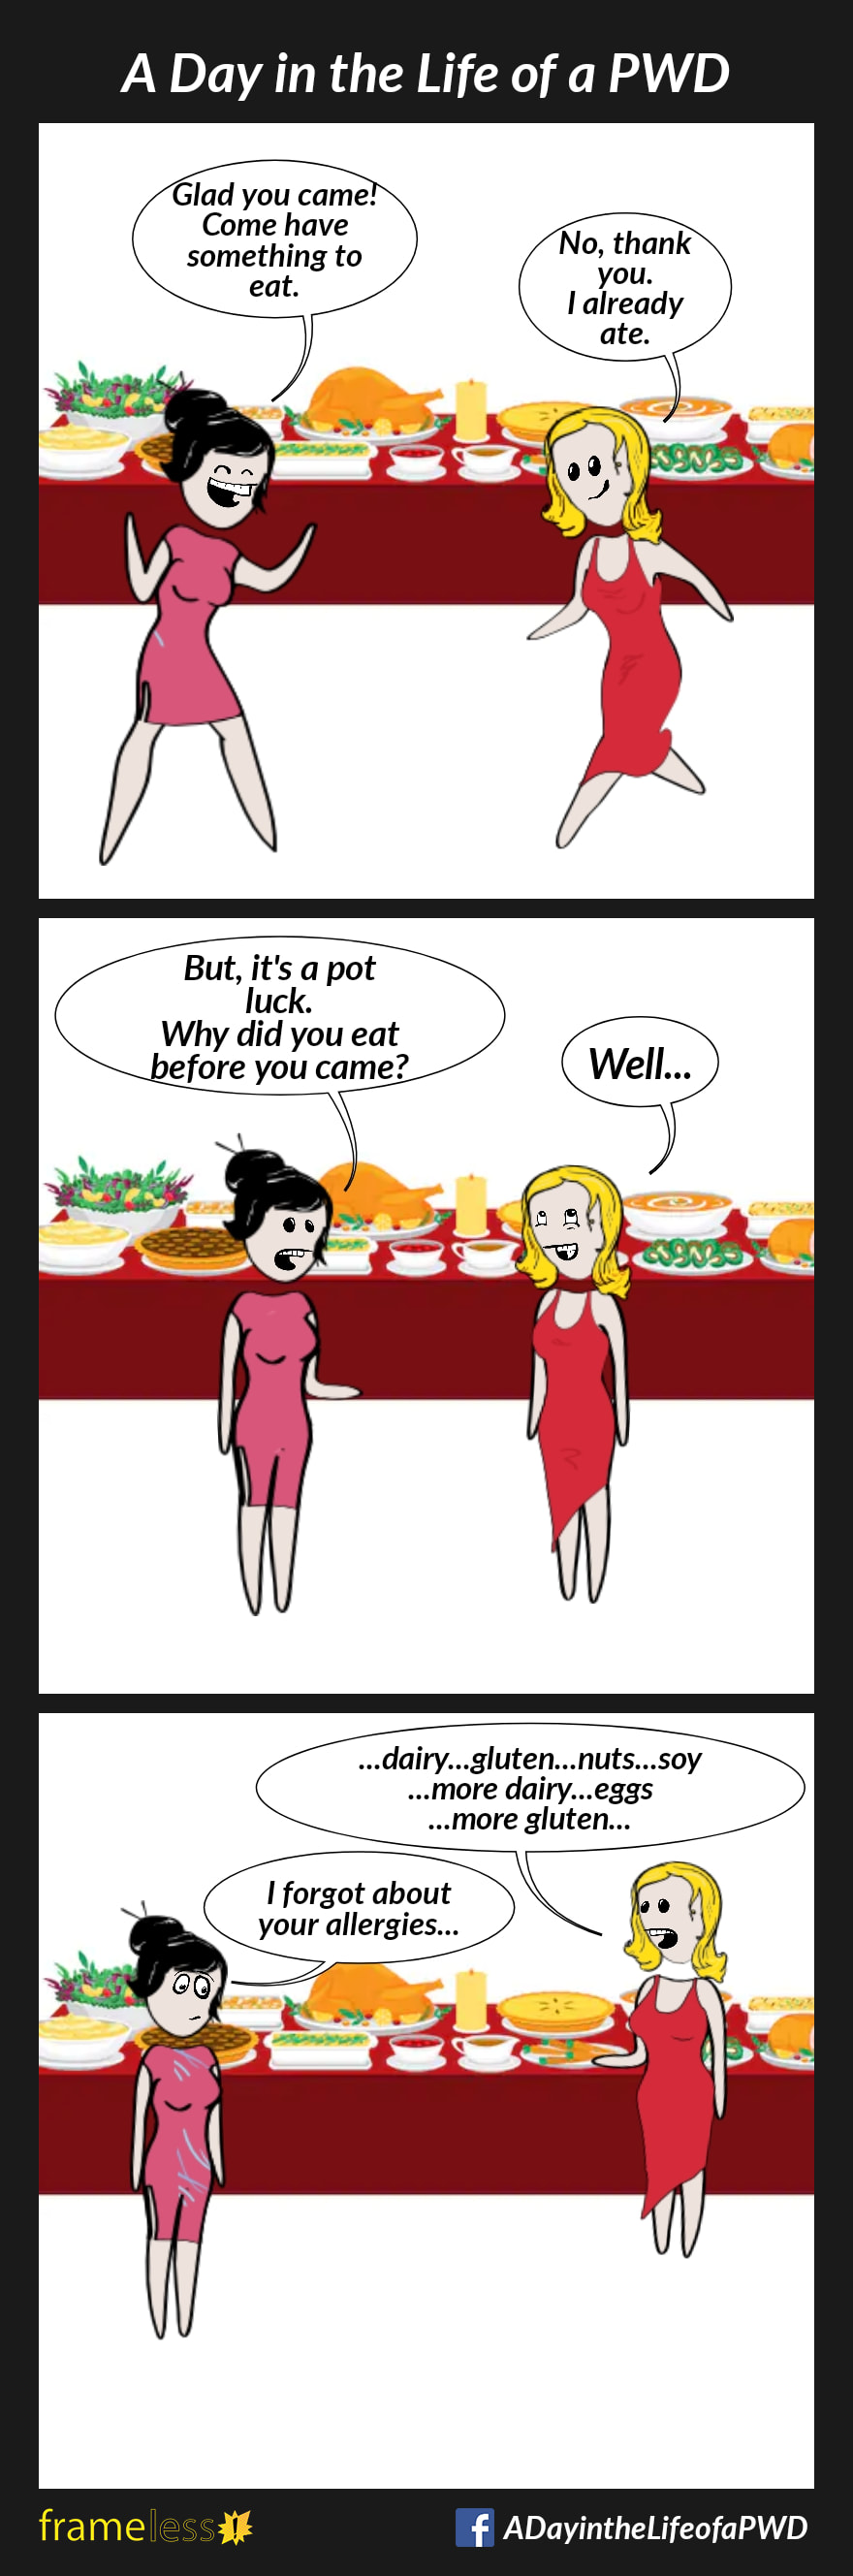 COMIC STRIP 
A Day in the Life of a PWD (Person With a Disability) 

Frame 1:
A woman arrives at a party, and is greeted by a friend.
FRIEND: Glad you came! Come have something to eat.
WOMAN: No thank you. I already ate.

Frame 2:
FRIEND: But it's a pot luck. Why did you eat before you came?
WOMAN: Well...

Frame 3:
The woman approches the food tables, and begins pointing out dishes.
WOMAN: ...dairy...gluten...nuts...soy...
more dairy...eggs...more gluten...
FRIEND: I forgot about your allergies...